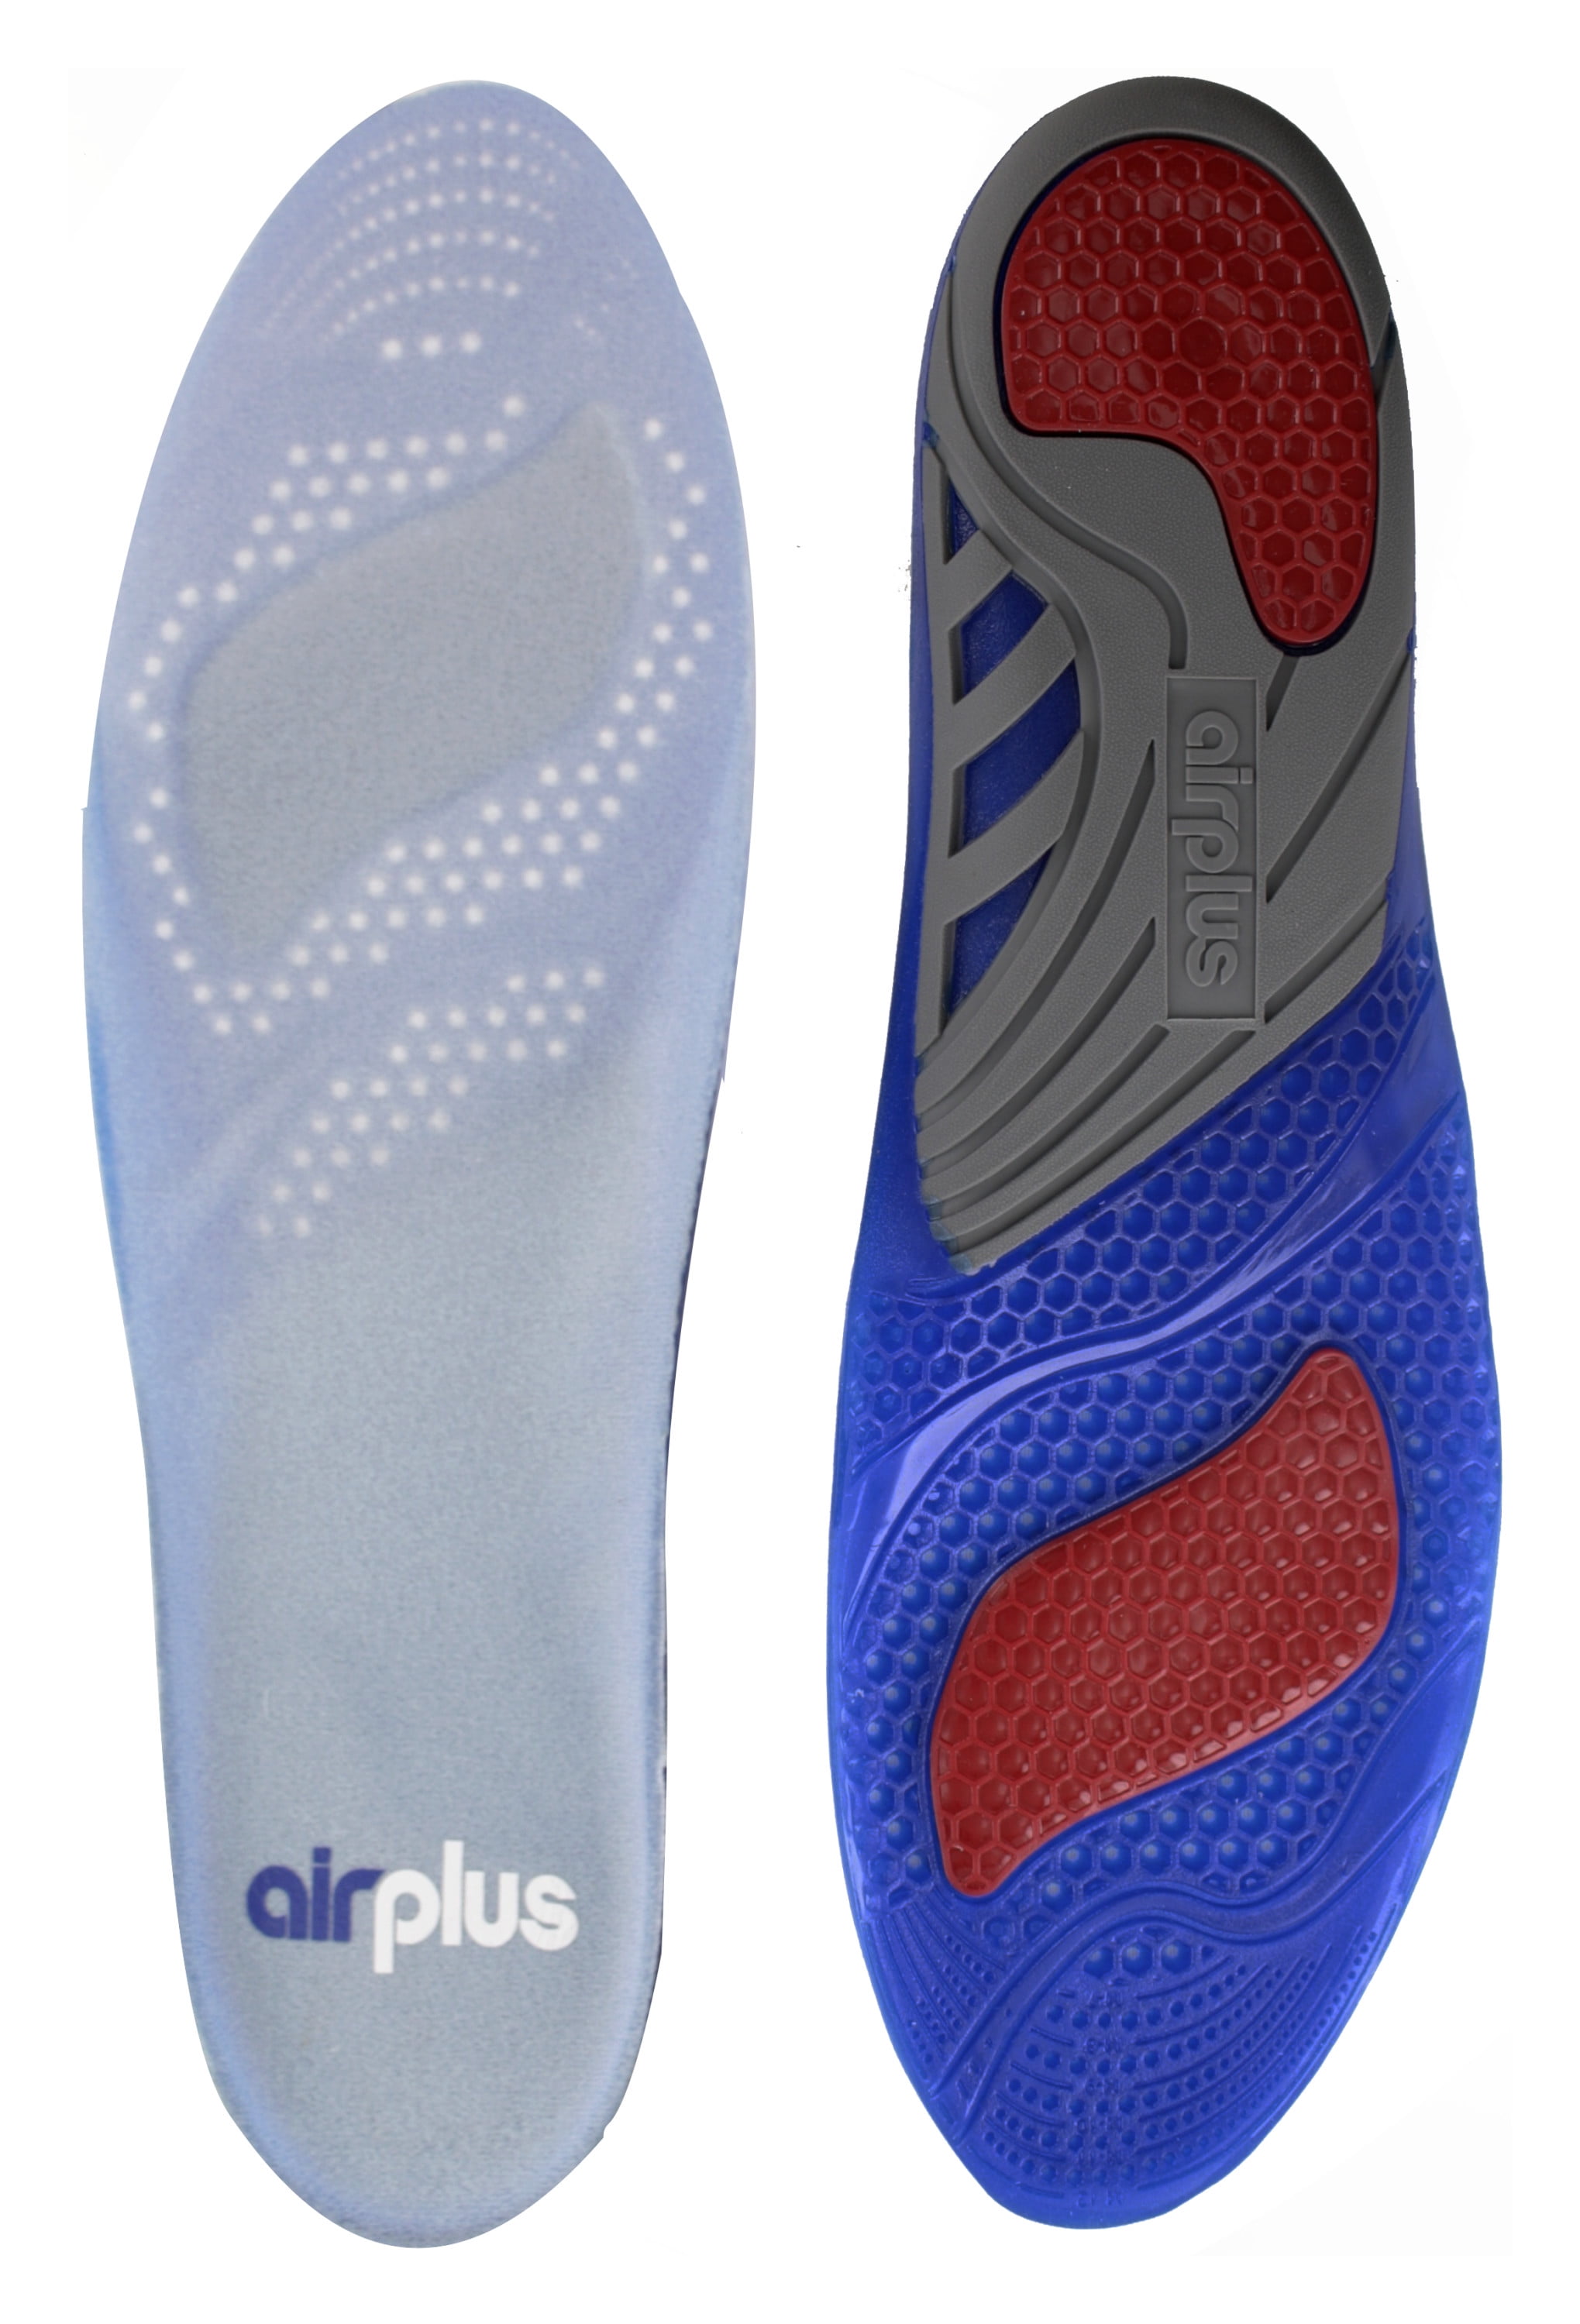 jelly insoles